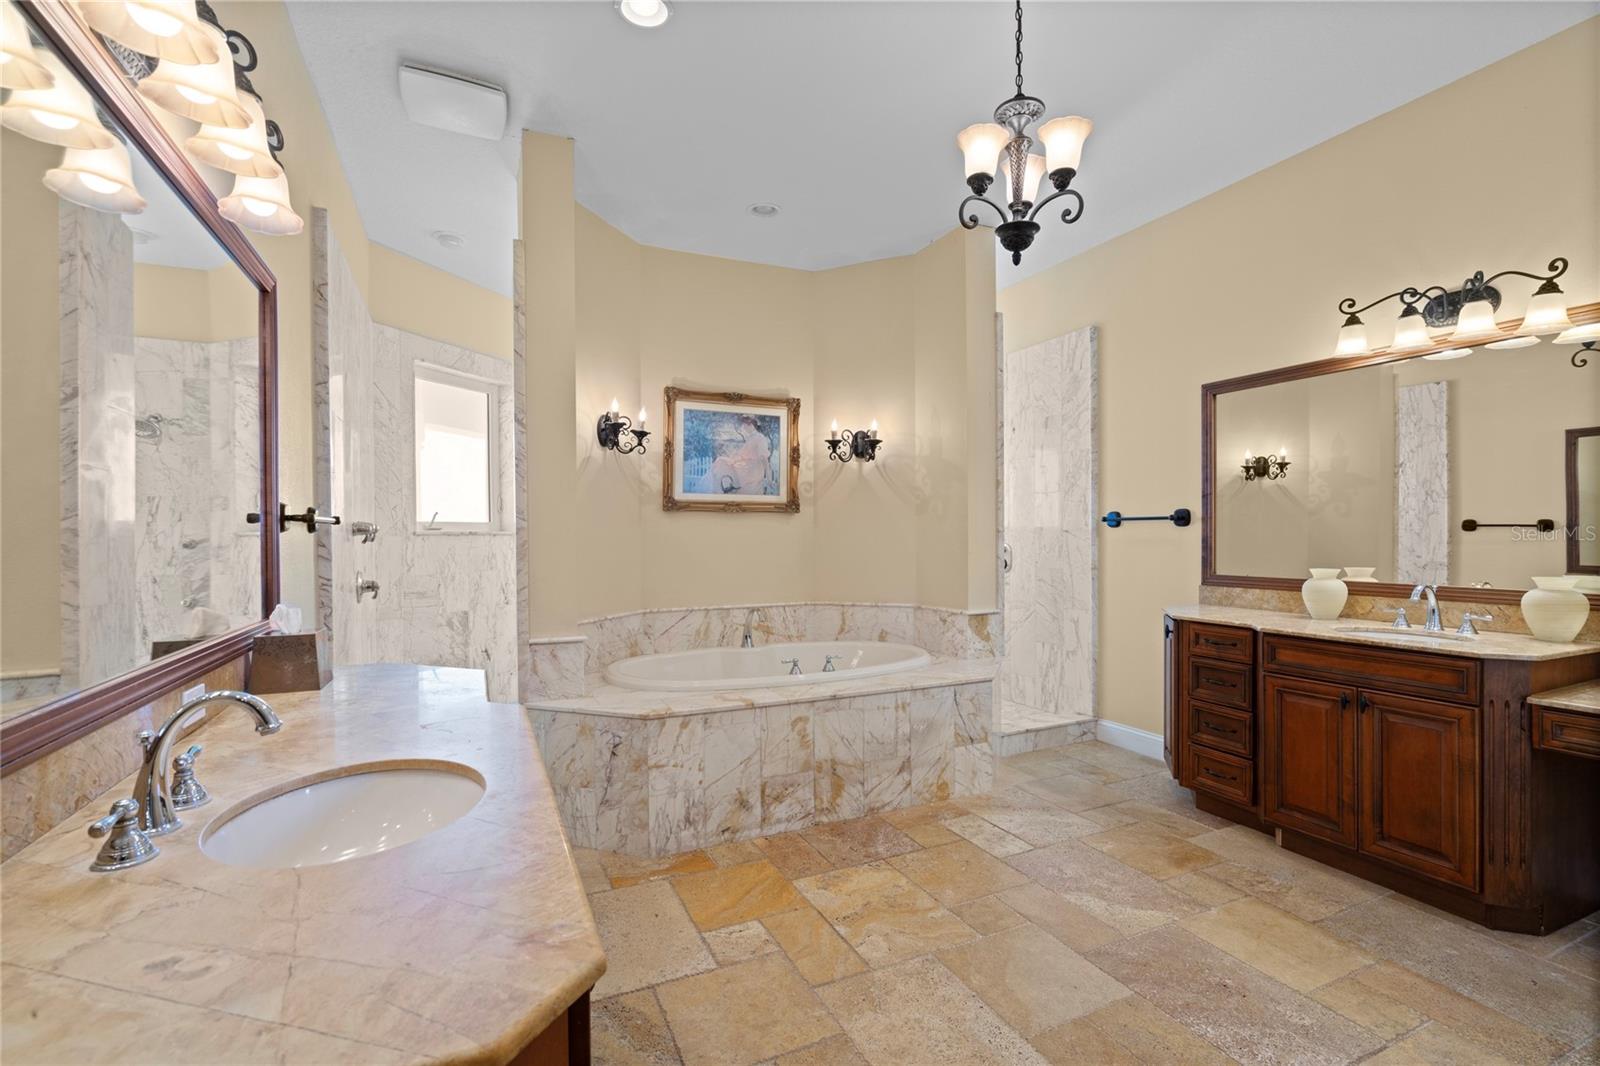 Master Suite bath with deep tub and walk around shower